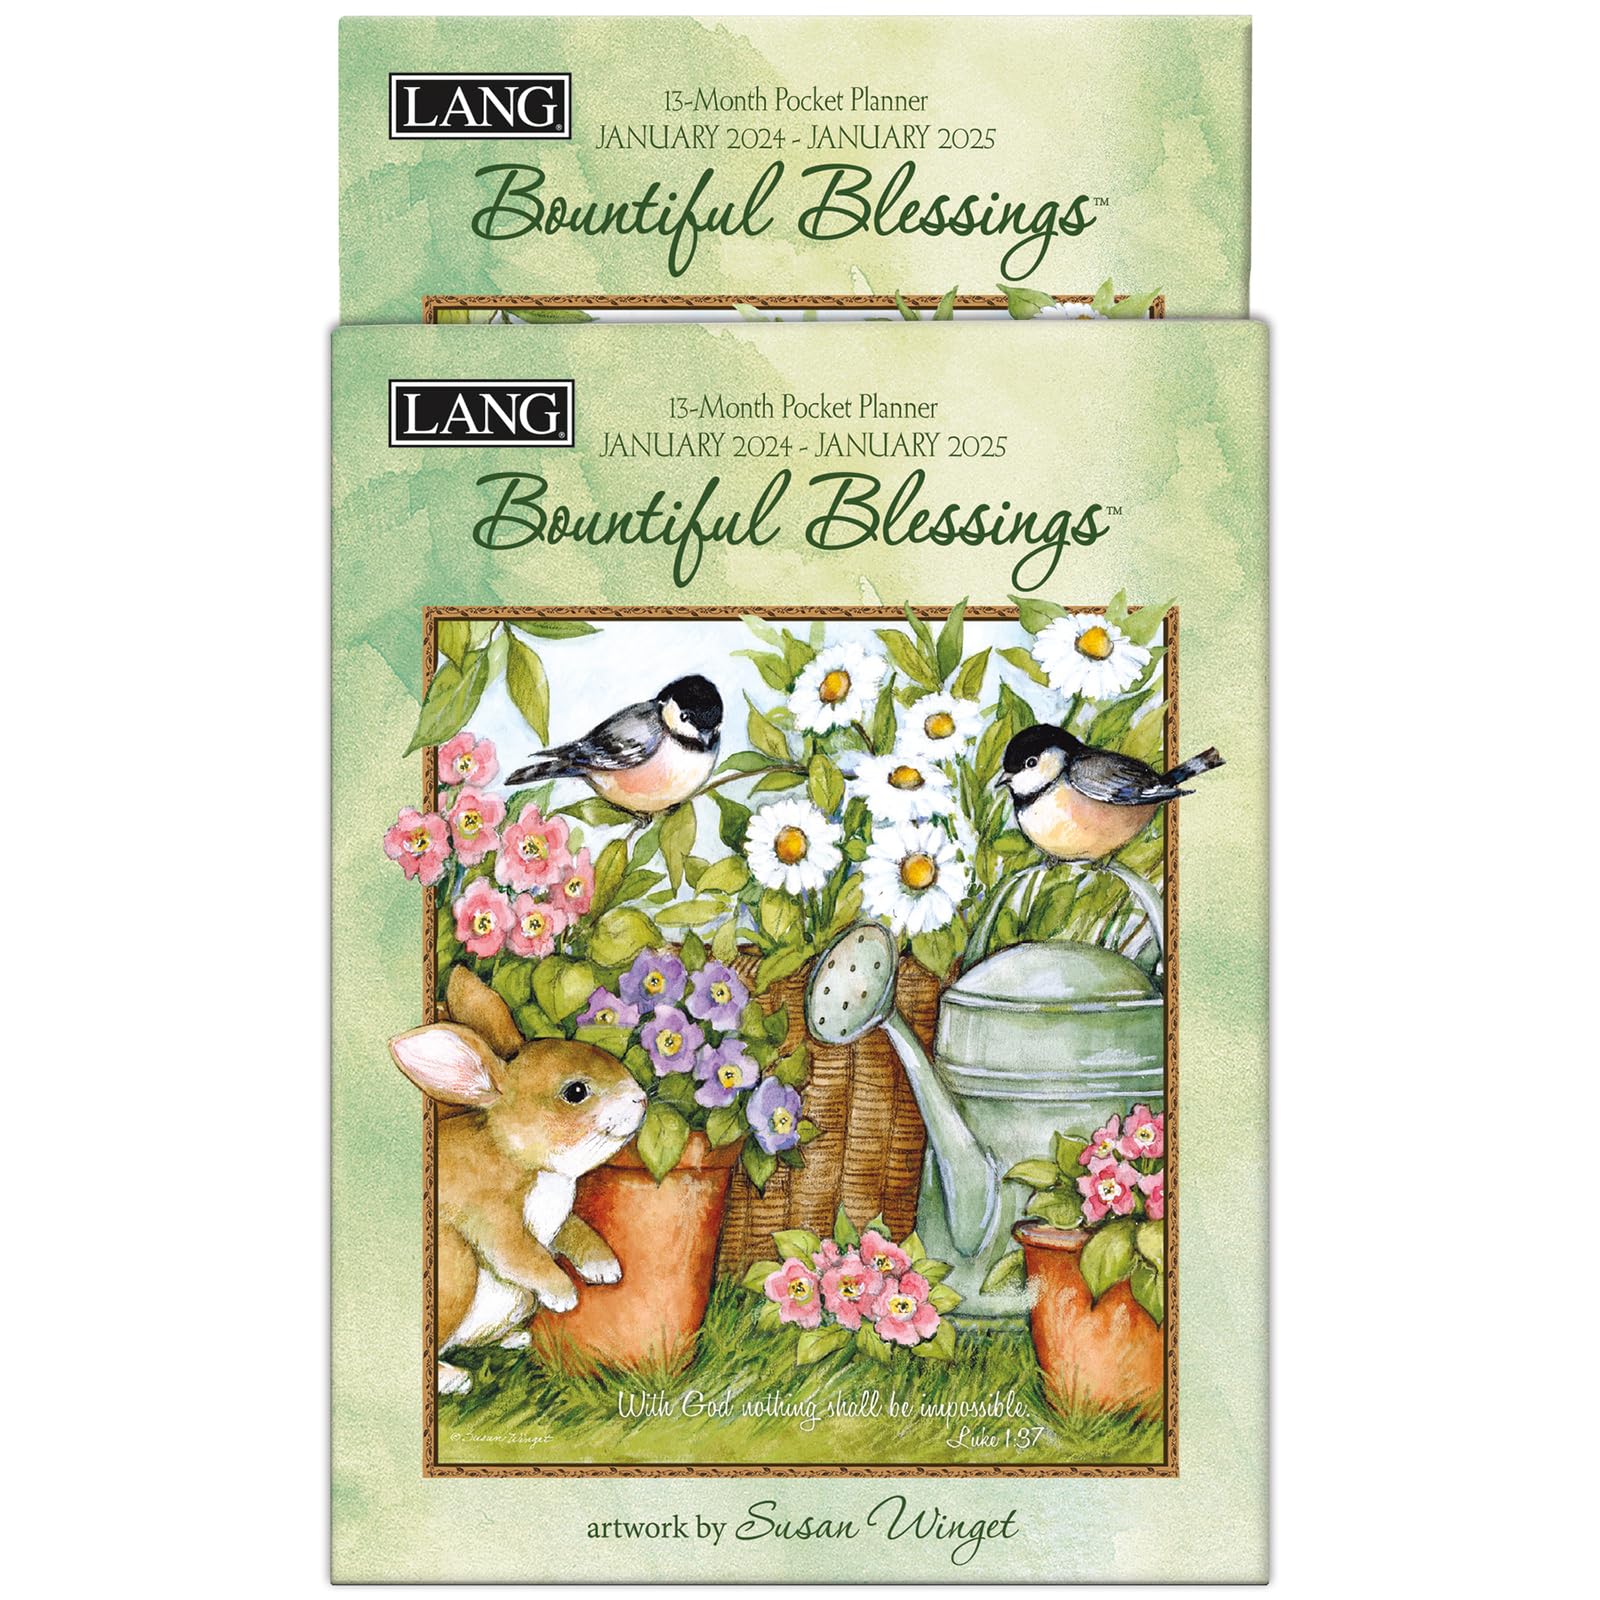 LANG Bountiful Blessings™ 2024 Monthly Pocket Planner (24991003158)